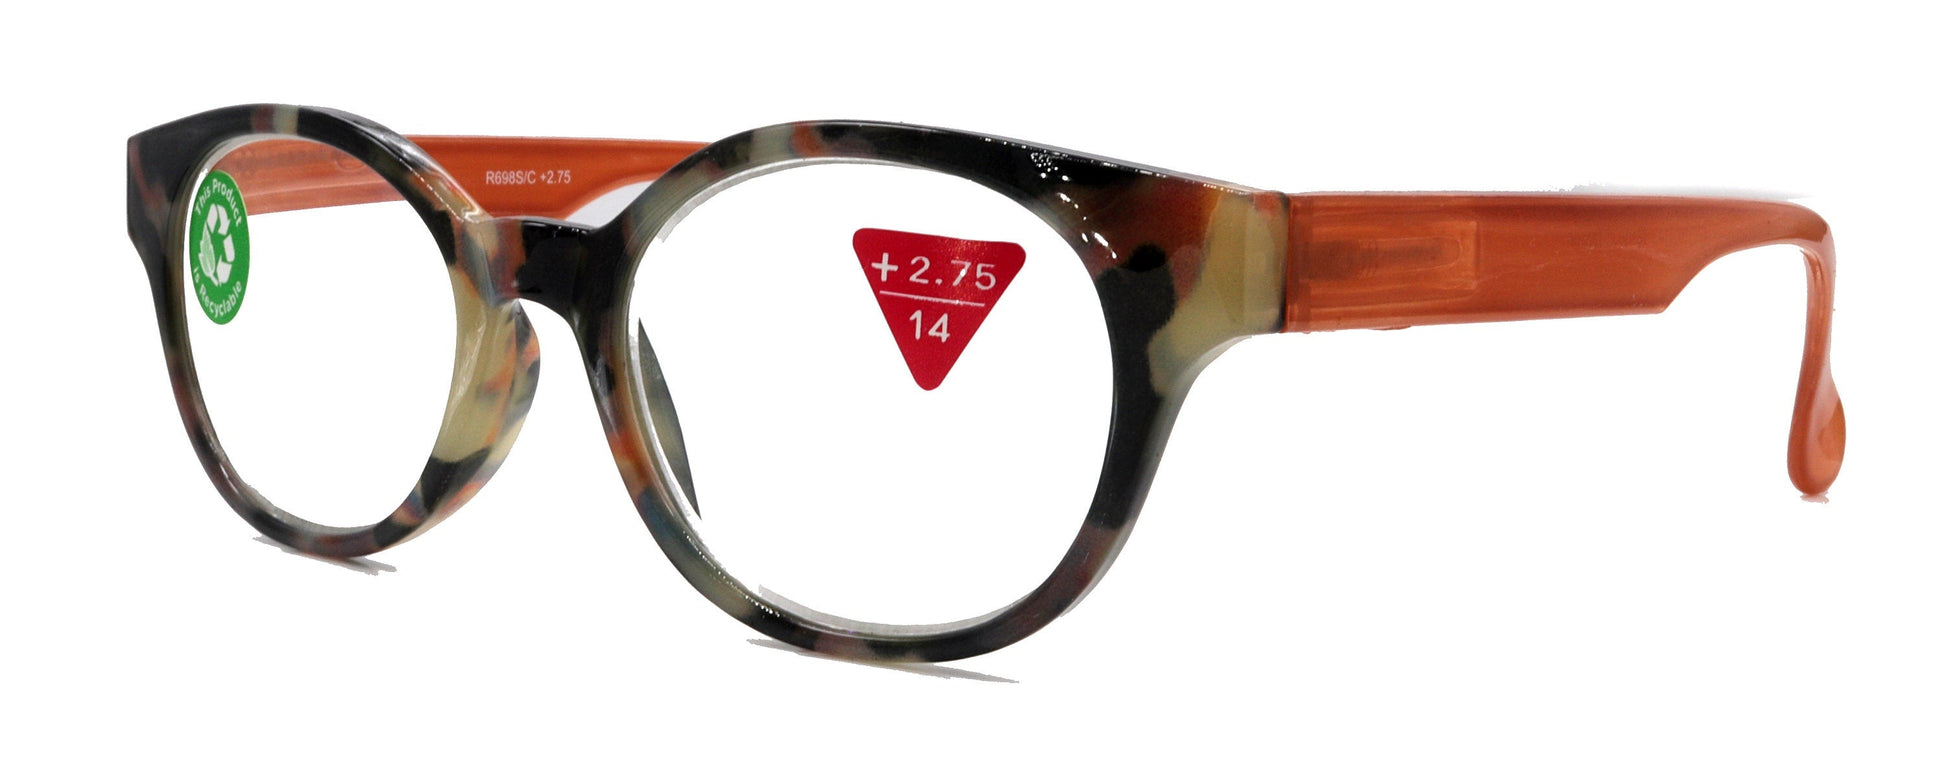 Sally, (Premium) Reading Glasses High End Readers +1.25..+3 Magnifying Glasses, Round Optical Frames (Tortoise Brown Orange) NY Fifth Avenue